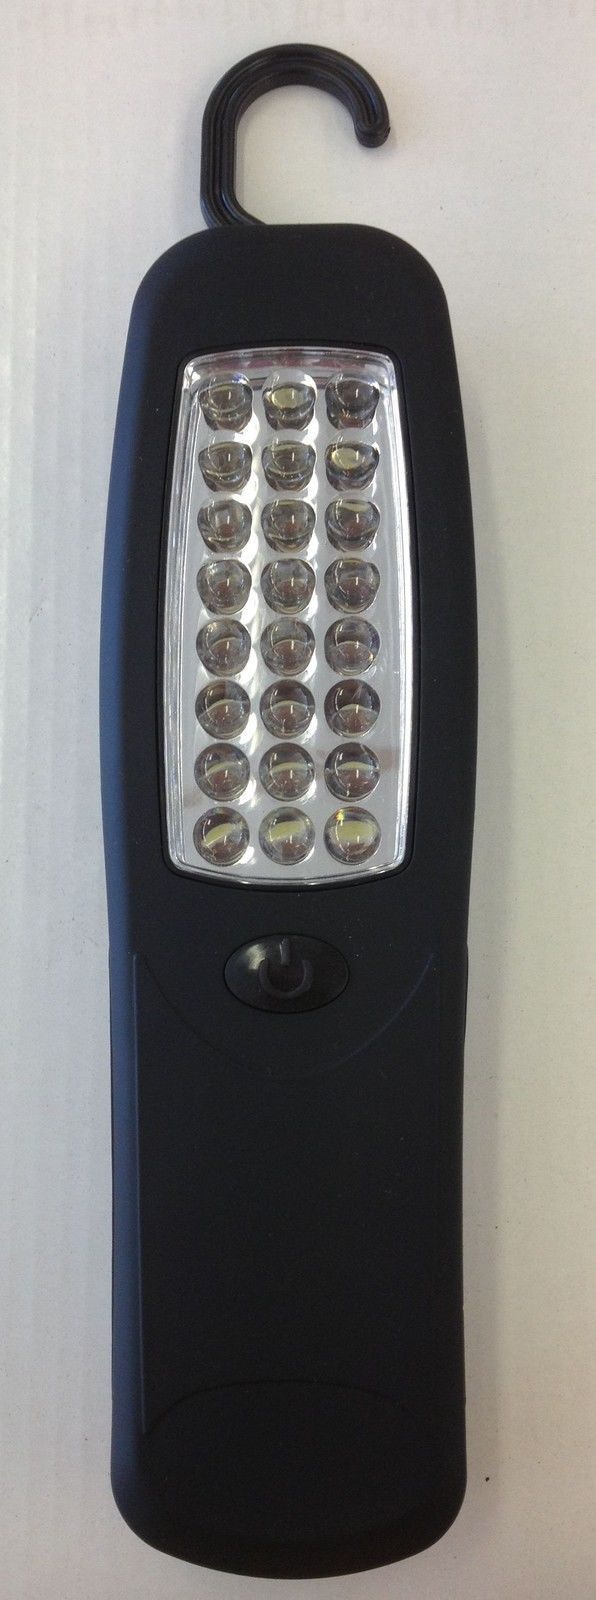 Hand Held 24 LED Torch